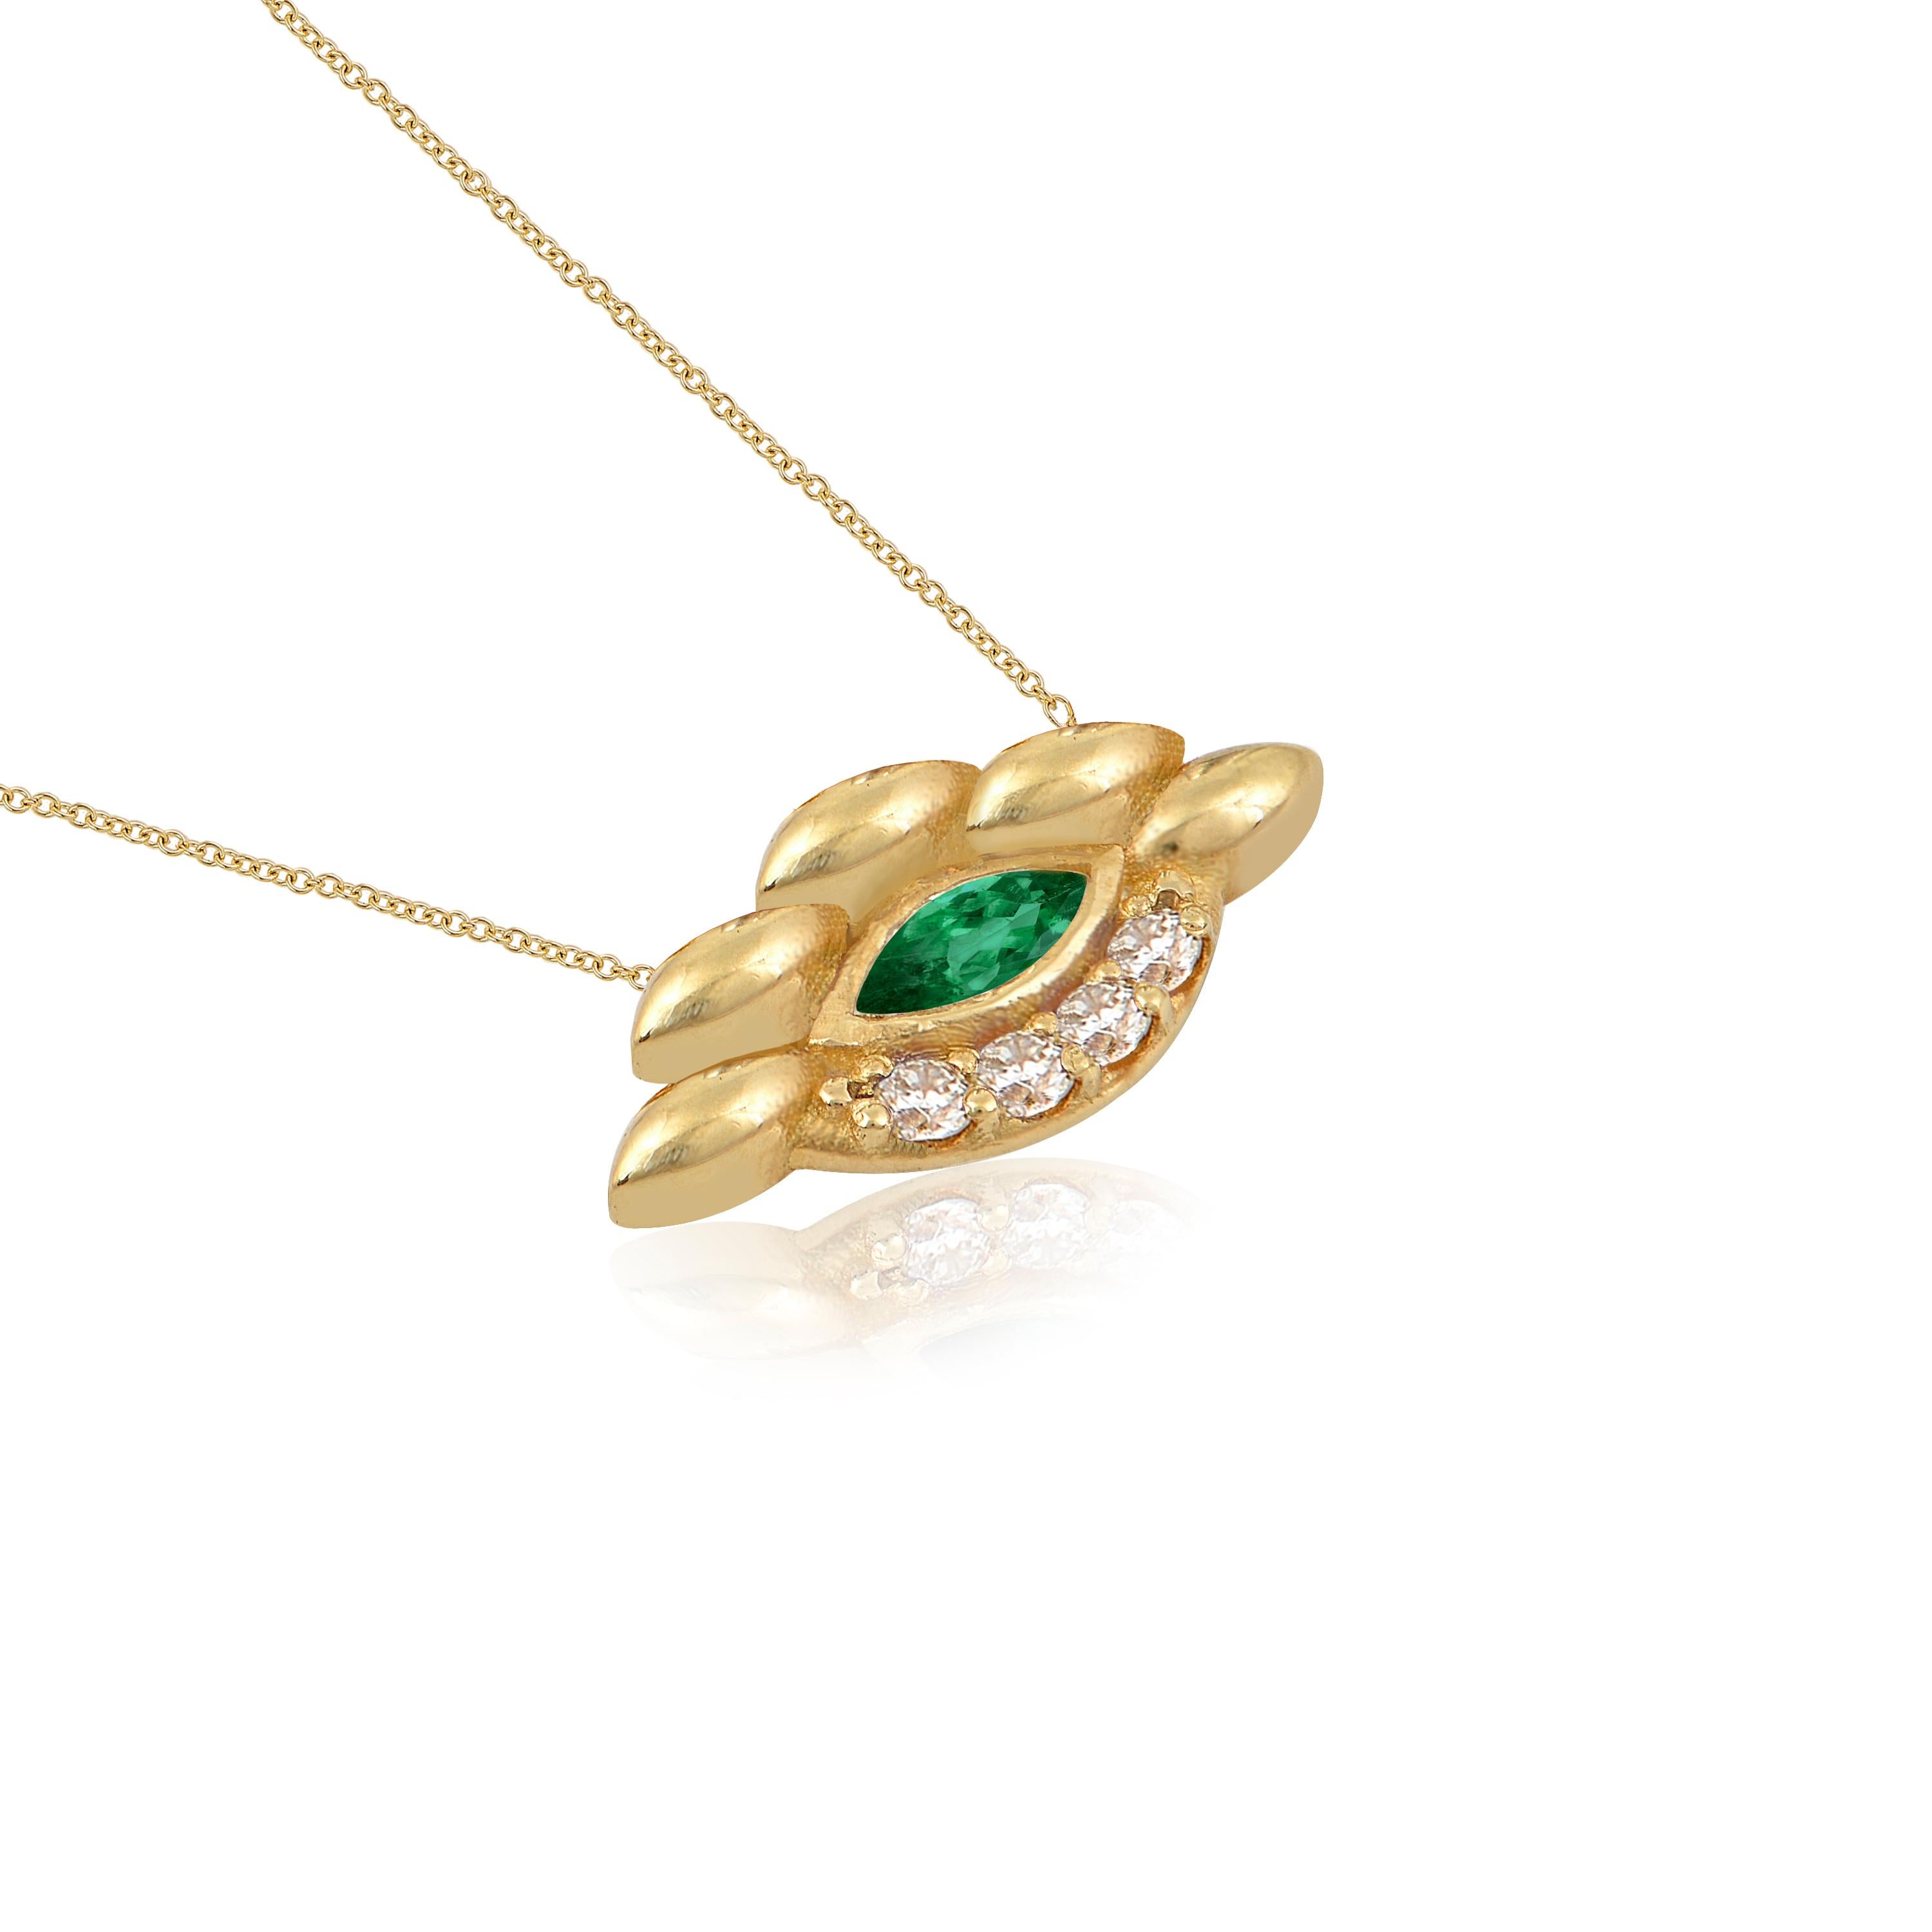 Designer: Alexia Gryllaki

Dimensions: motif 18x9mm, chain 450mm
Weight: approximately 3.8g (inc. chain) 
Barcode: NEX7008SS


Eye pendant in 18 karat yellow gold with a 400mm chain, set with a marquise emerald approx. 0.23cts and round